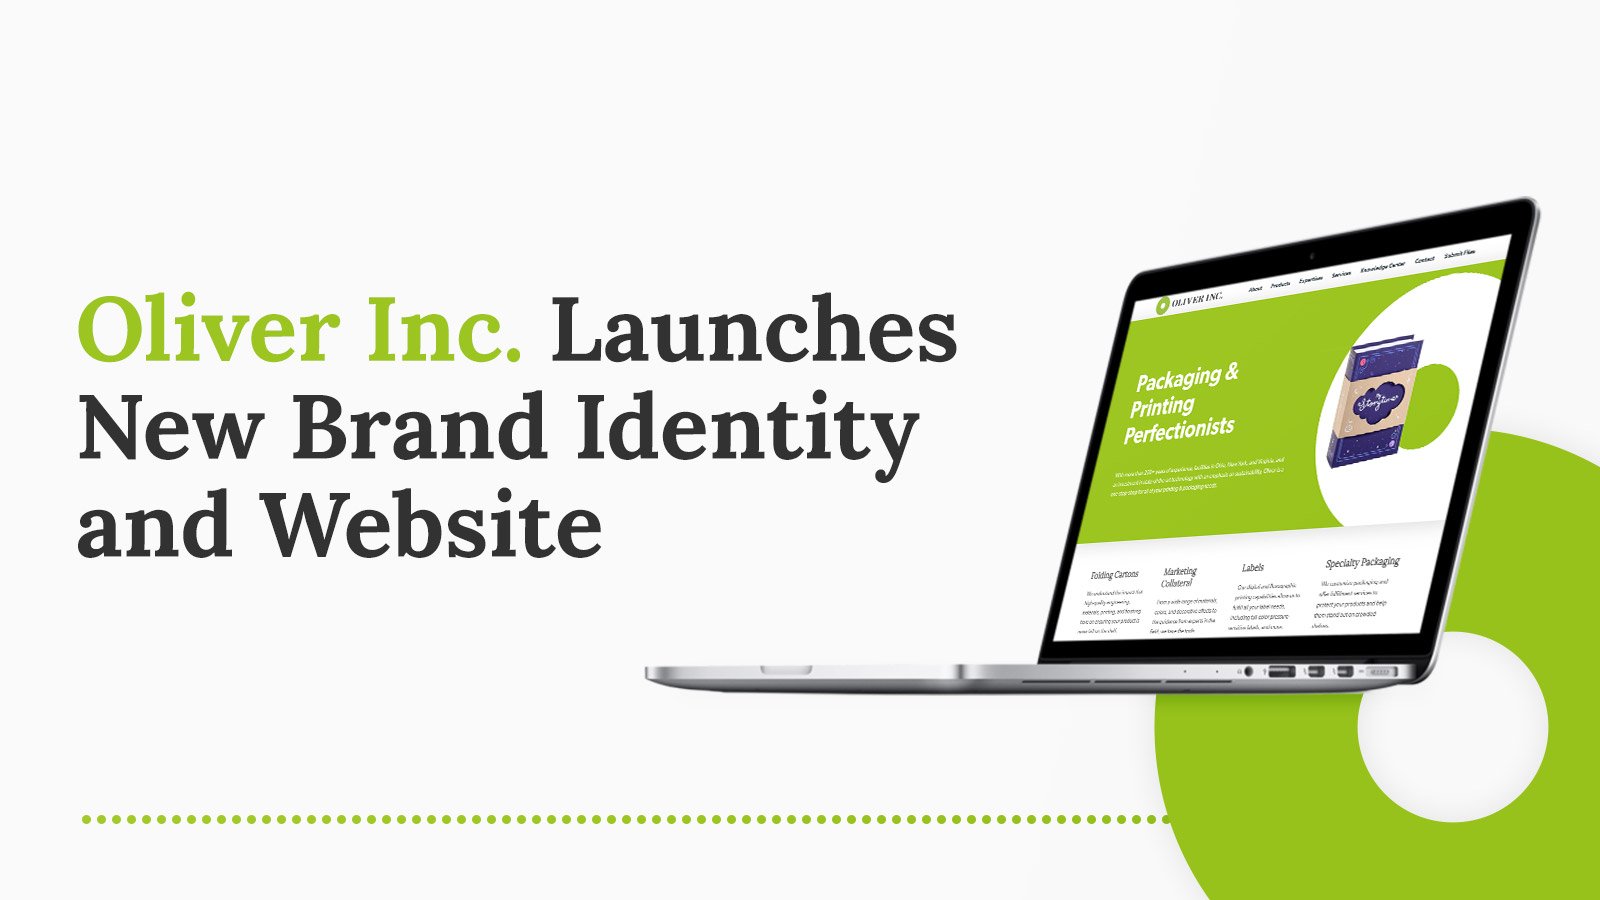 Oliver Inc. launches new brand identity and website